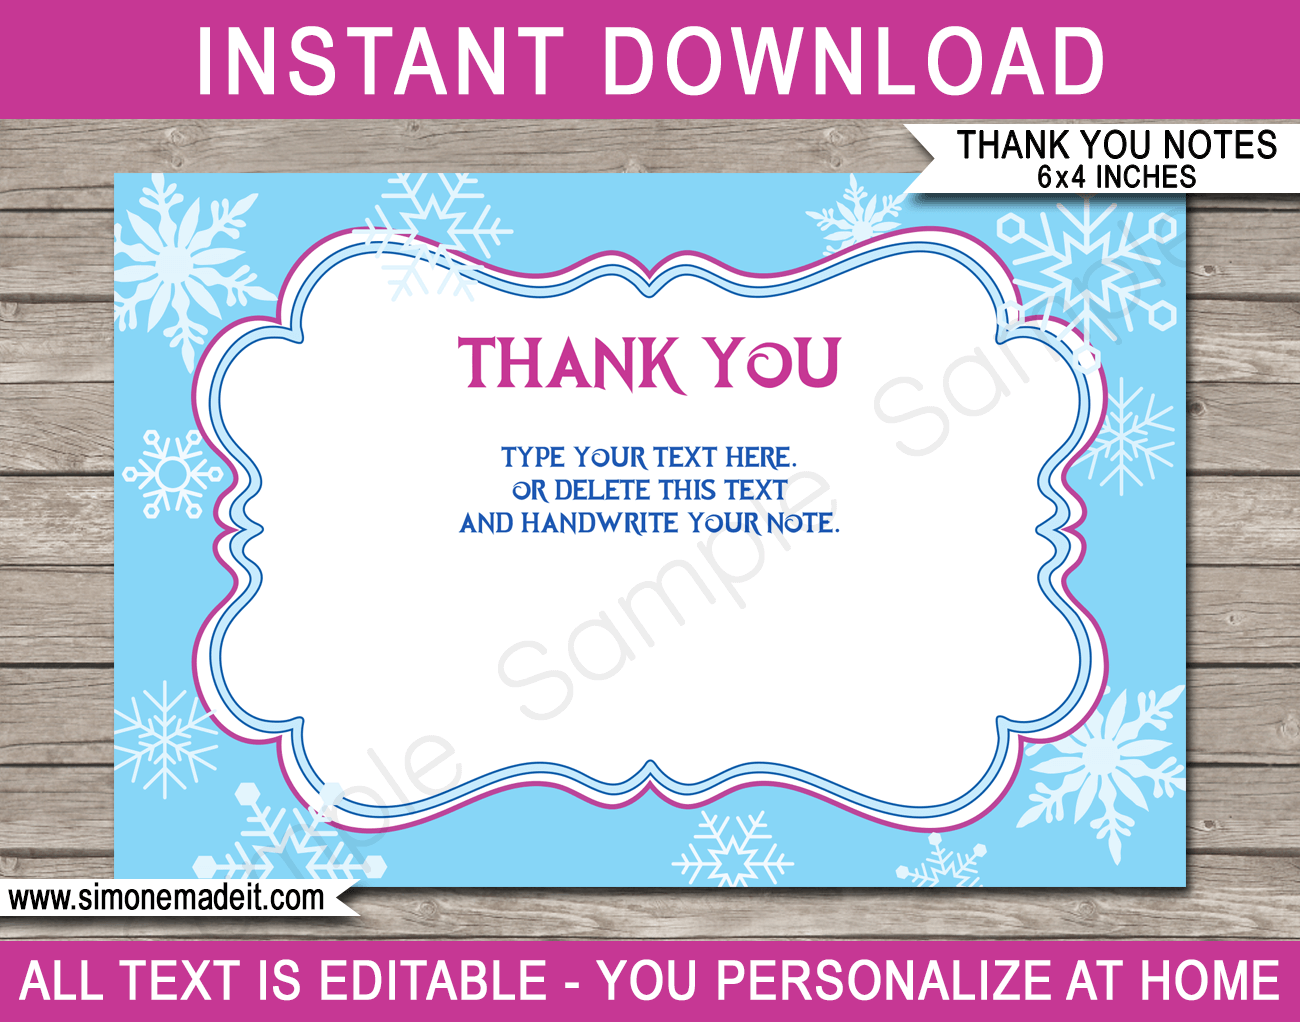 Printable Frozen Party Thank You Cards - Favor Tags - Frozen Birthday Party theme - Editable Template - Instant Download via simonemadeit.com